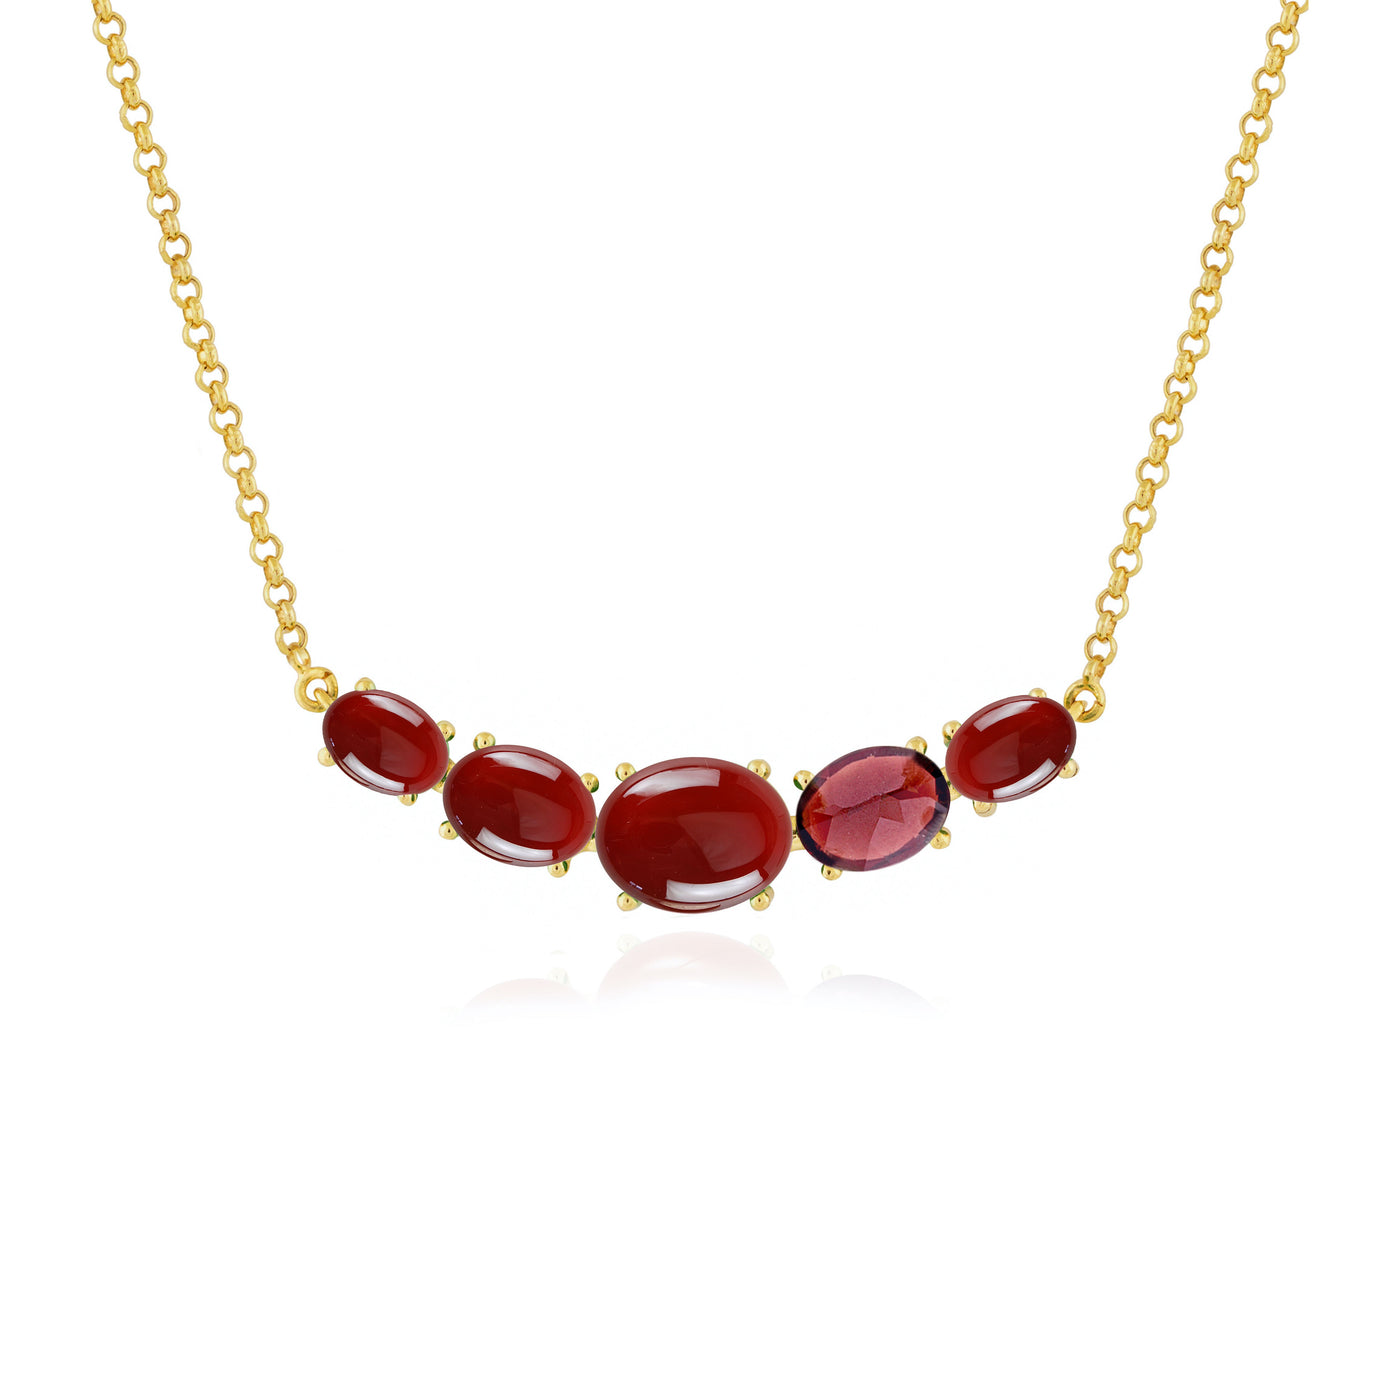 fine jewelry necklace in gold with agate carnelian and ruby gemstones from Atelier ORMAN